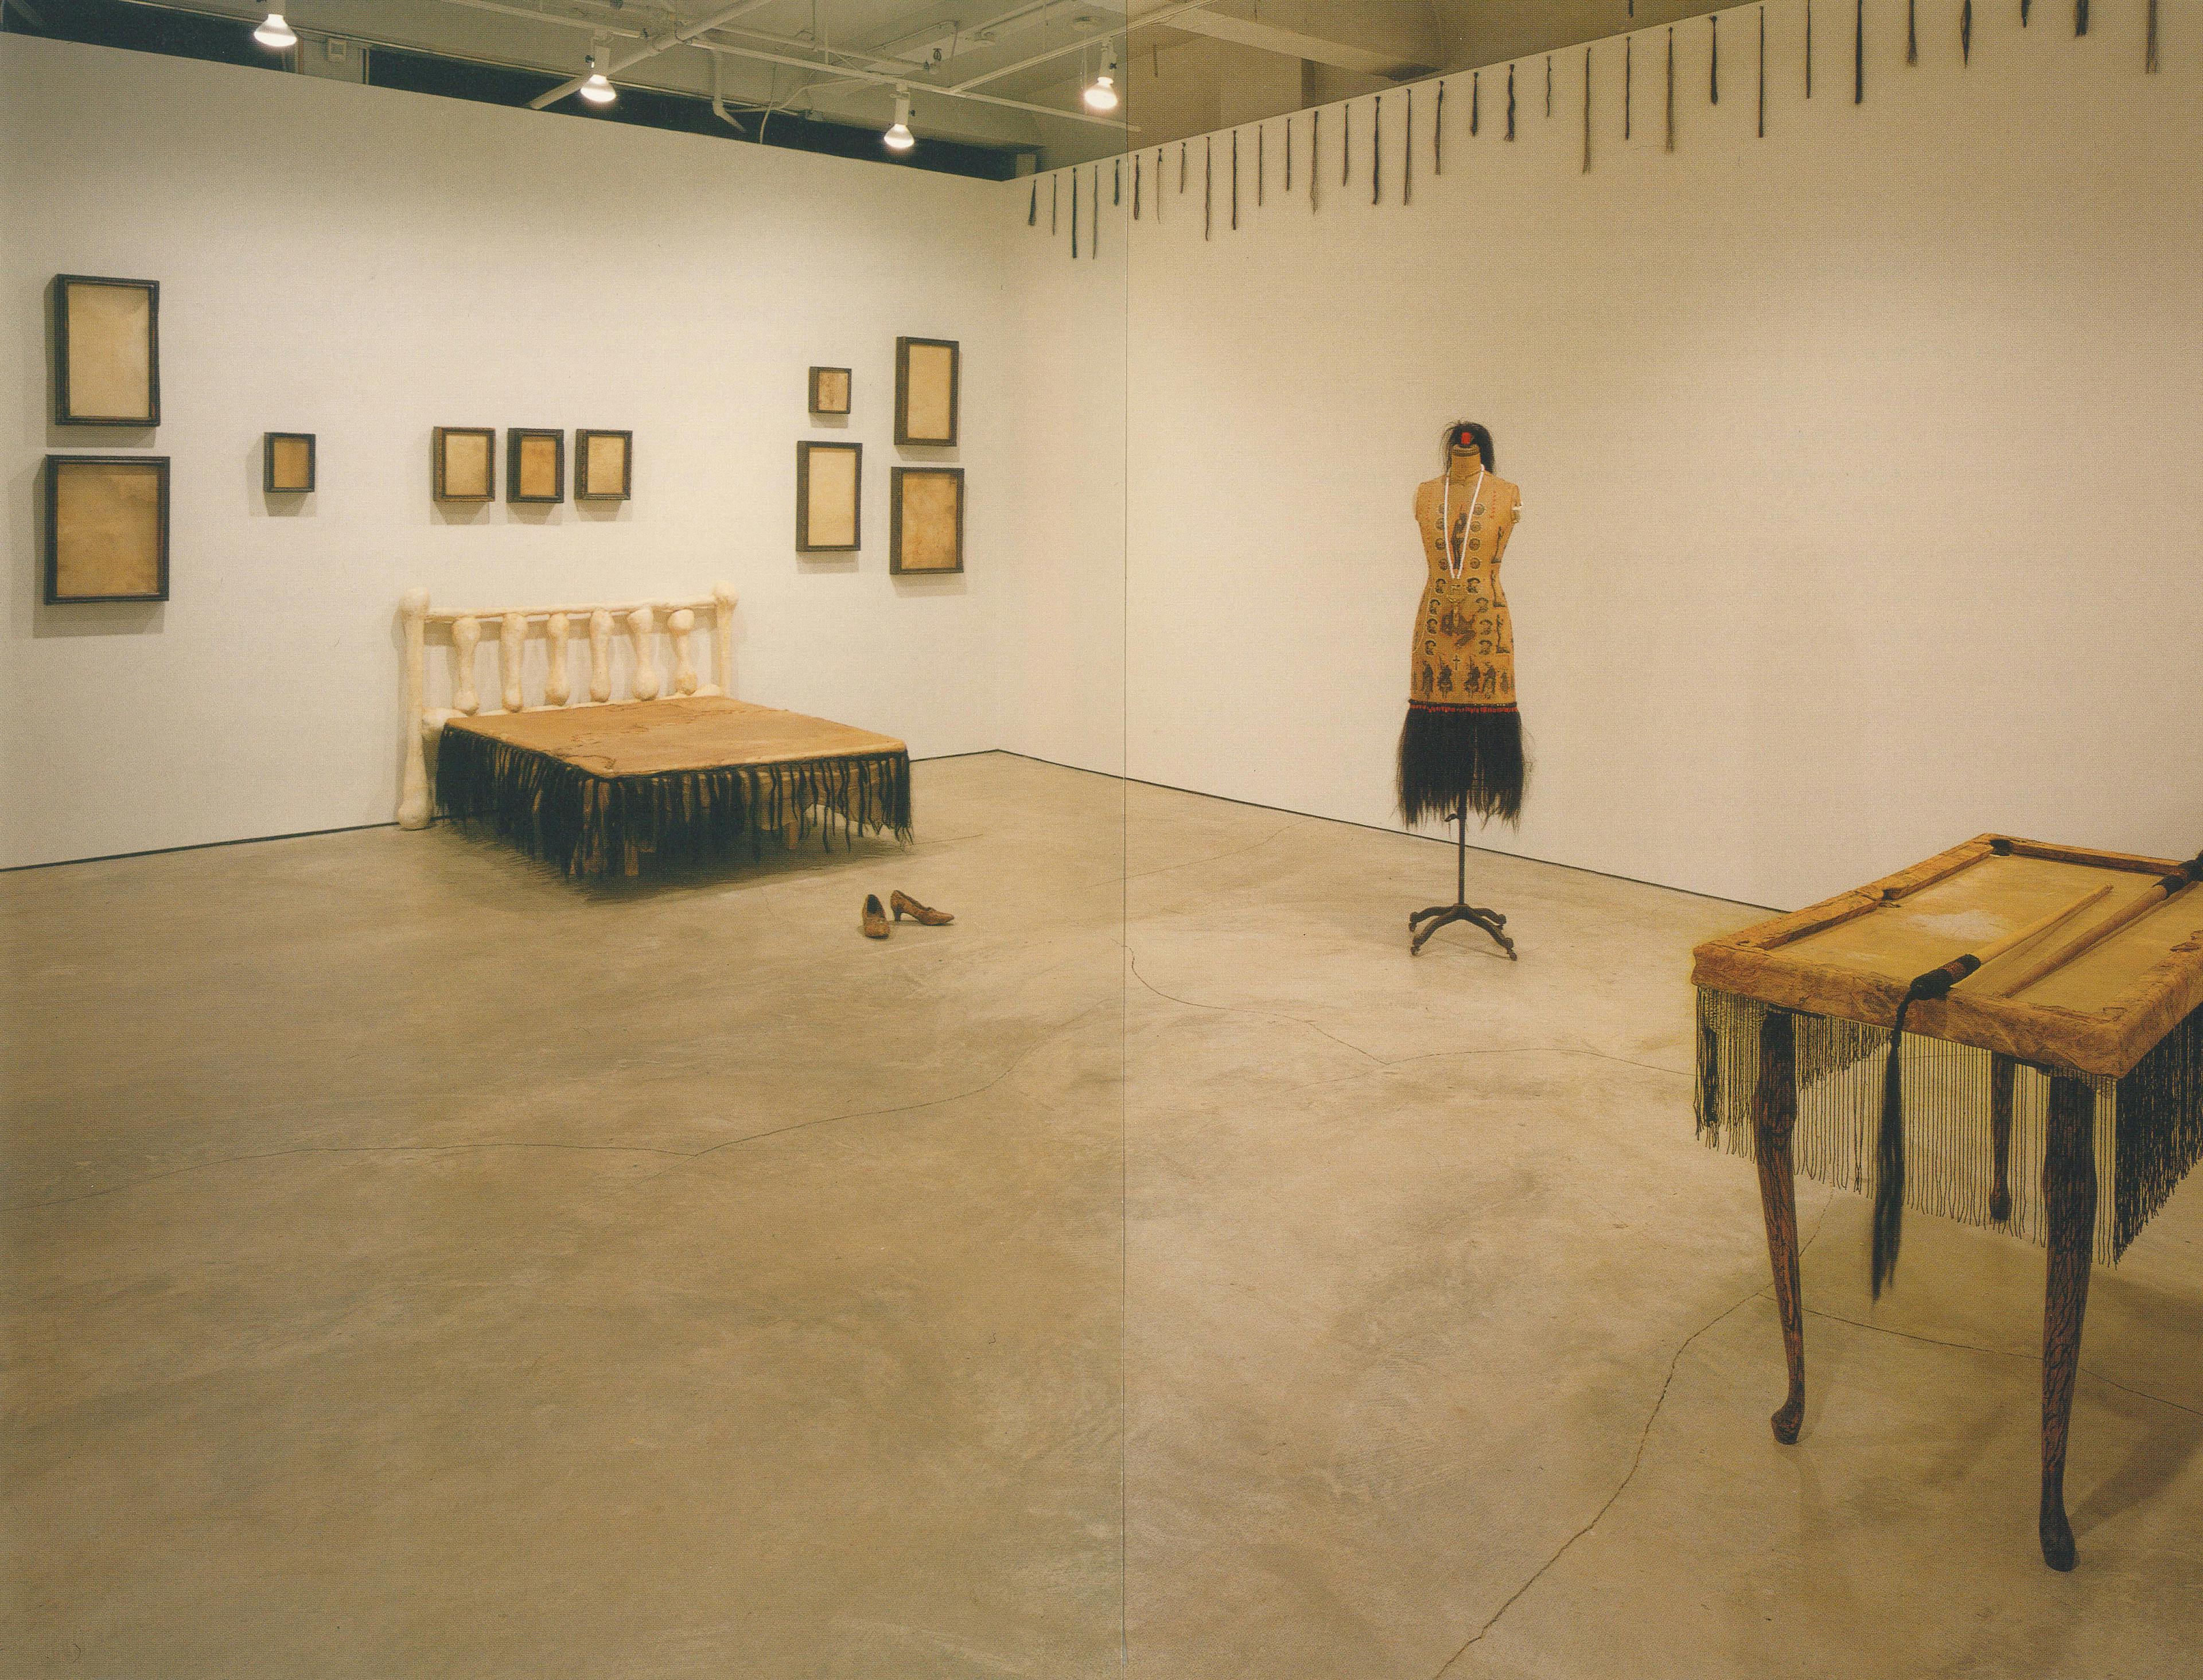 Many brown-coloured artworks are installed in a gallery. A wood table, a dressmaking mannequin, a pair of shoes, and a bed are placed on the floor. Ten paintings are mounted on the wall above the bed.